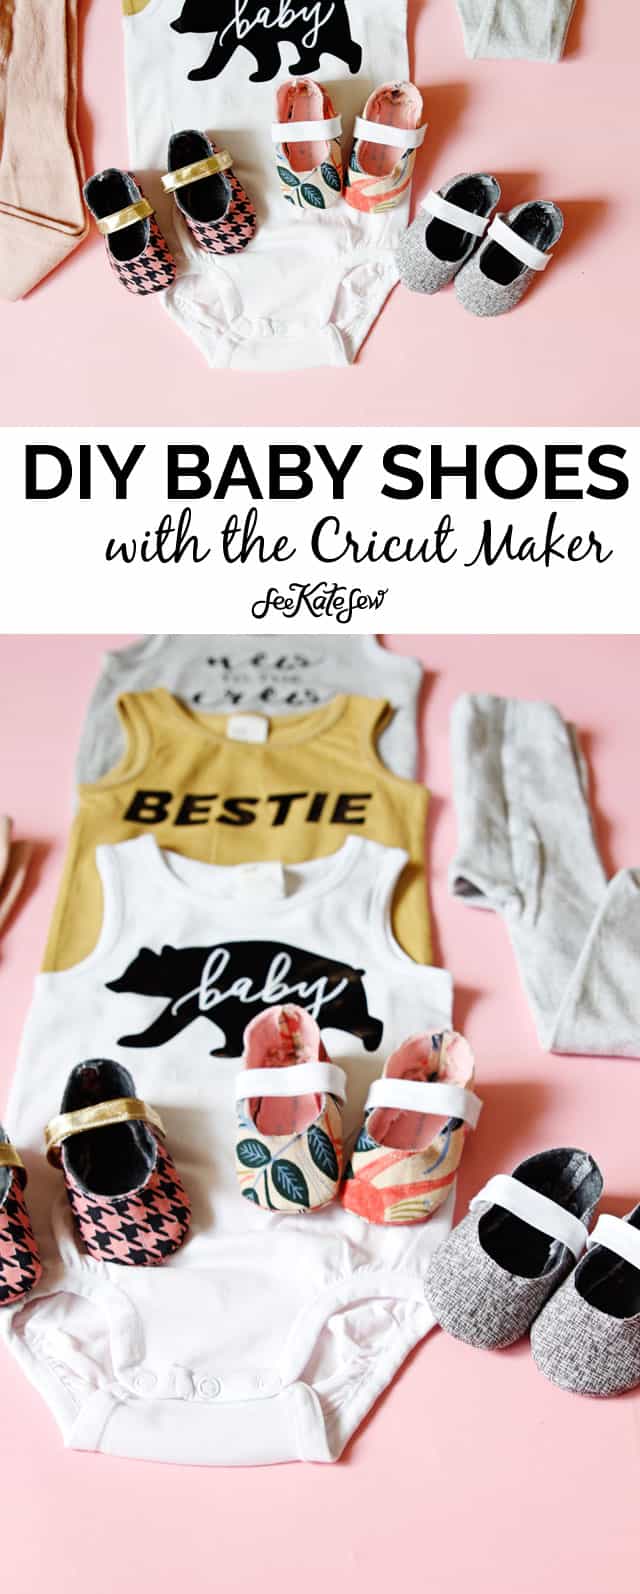 Baby Shoes Pattern with Cricut and Simplicity | diy baby shoes | diy baby clothing | baby clothing patterns | handmade baby clothes | cricut crafts || See Kate Sew #diy #patterns #babyshoes #diybaby #diybabyclothing #diybabyshoes #cricut #cricutdiy